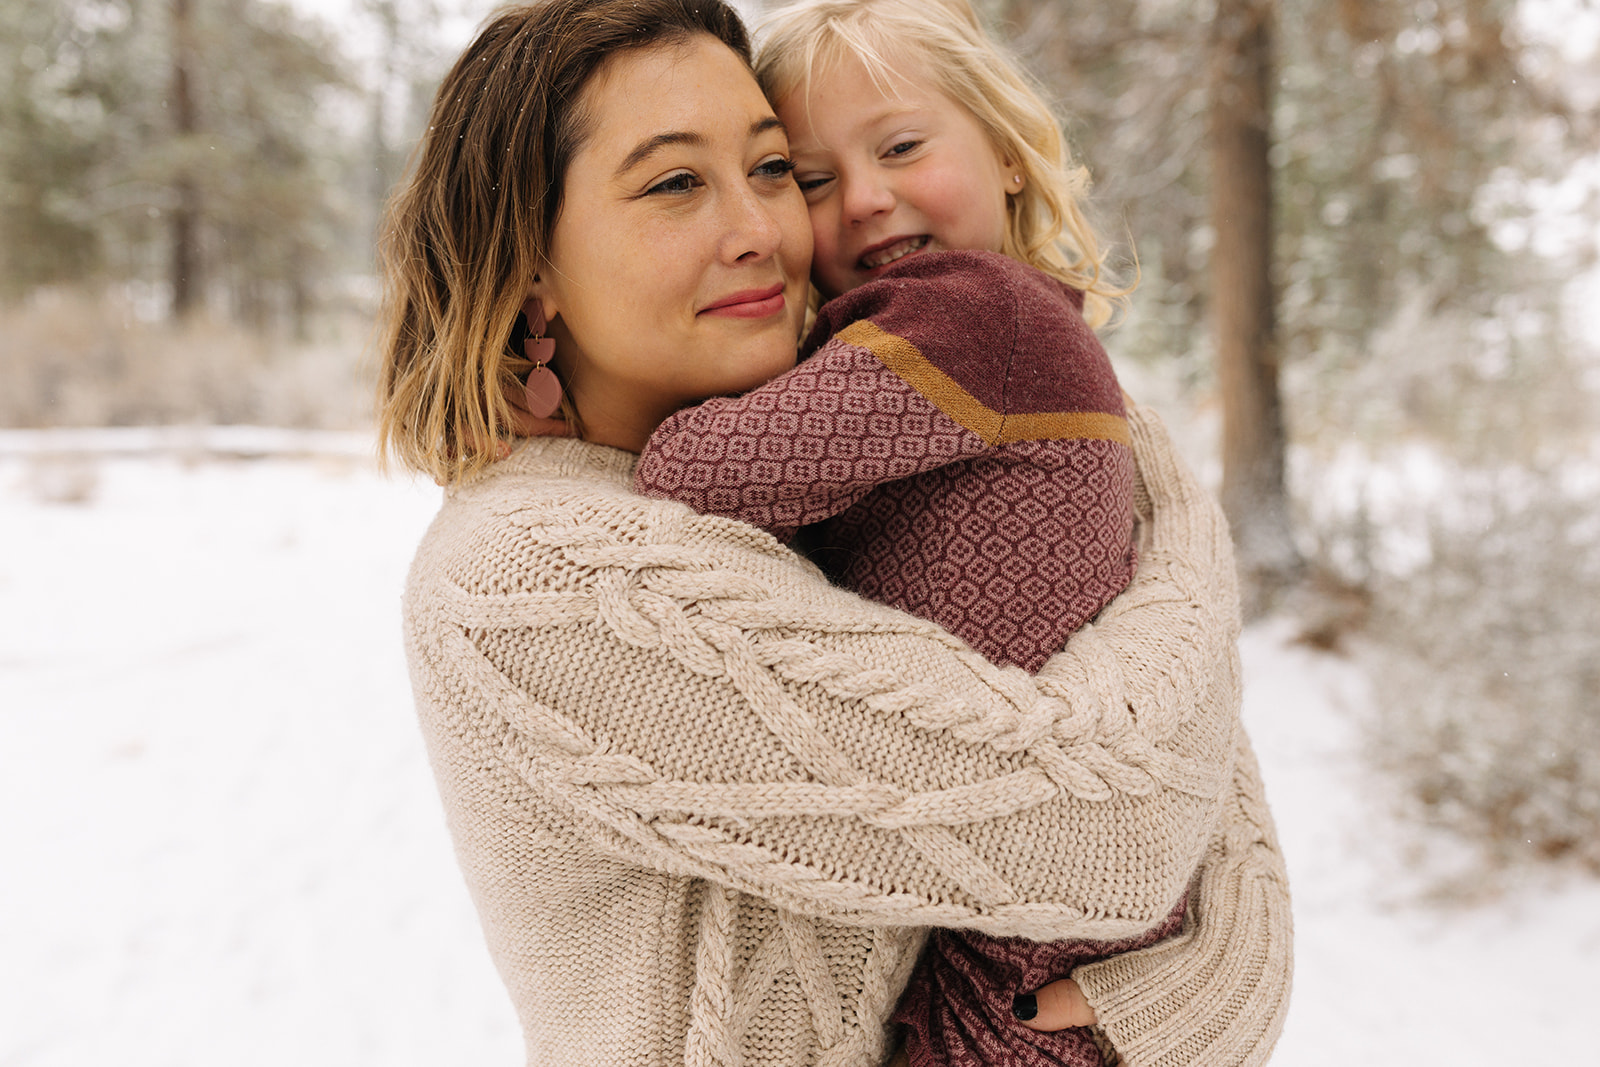 A mom and her young daughter embracing in a hug without looking at the camera in a snowy setting